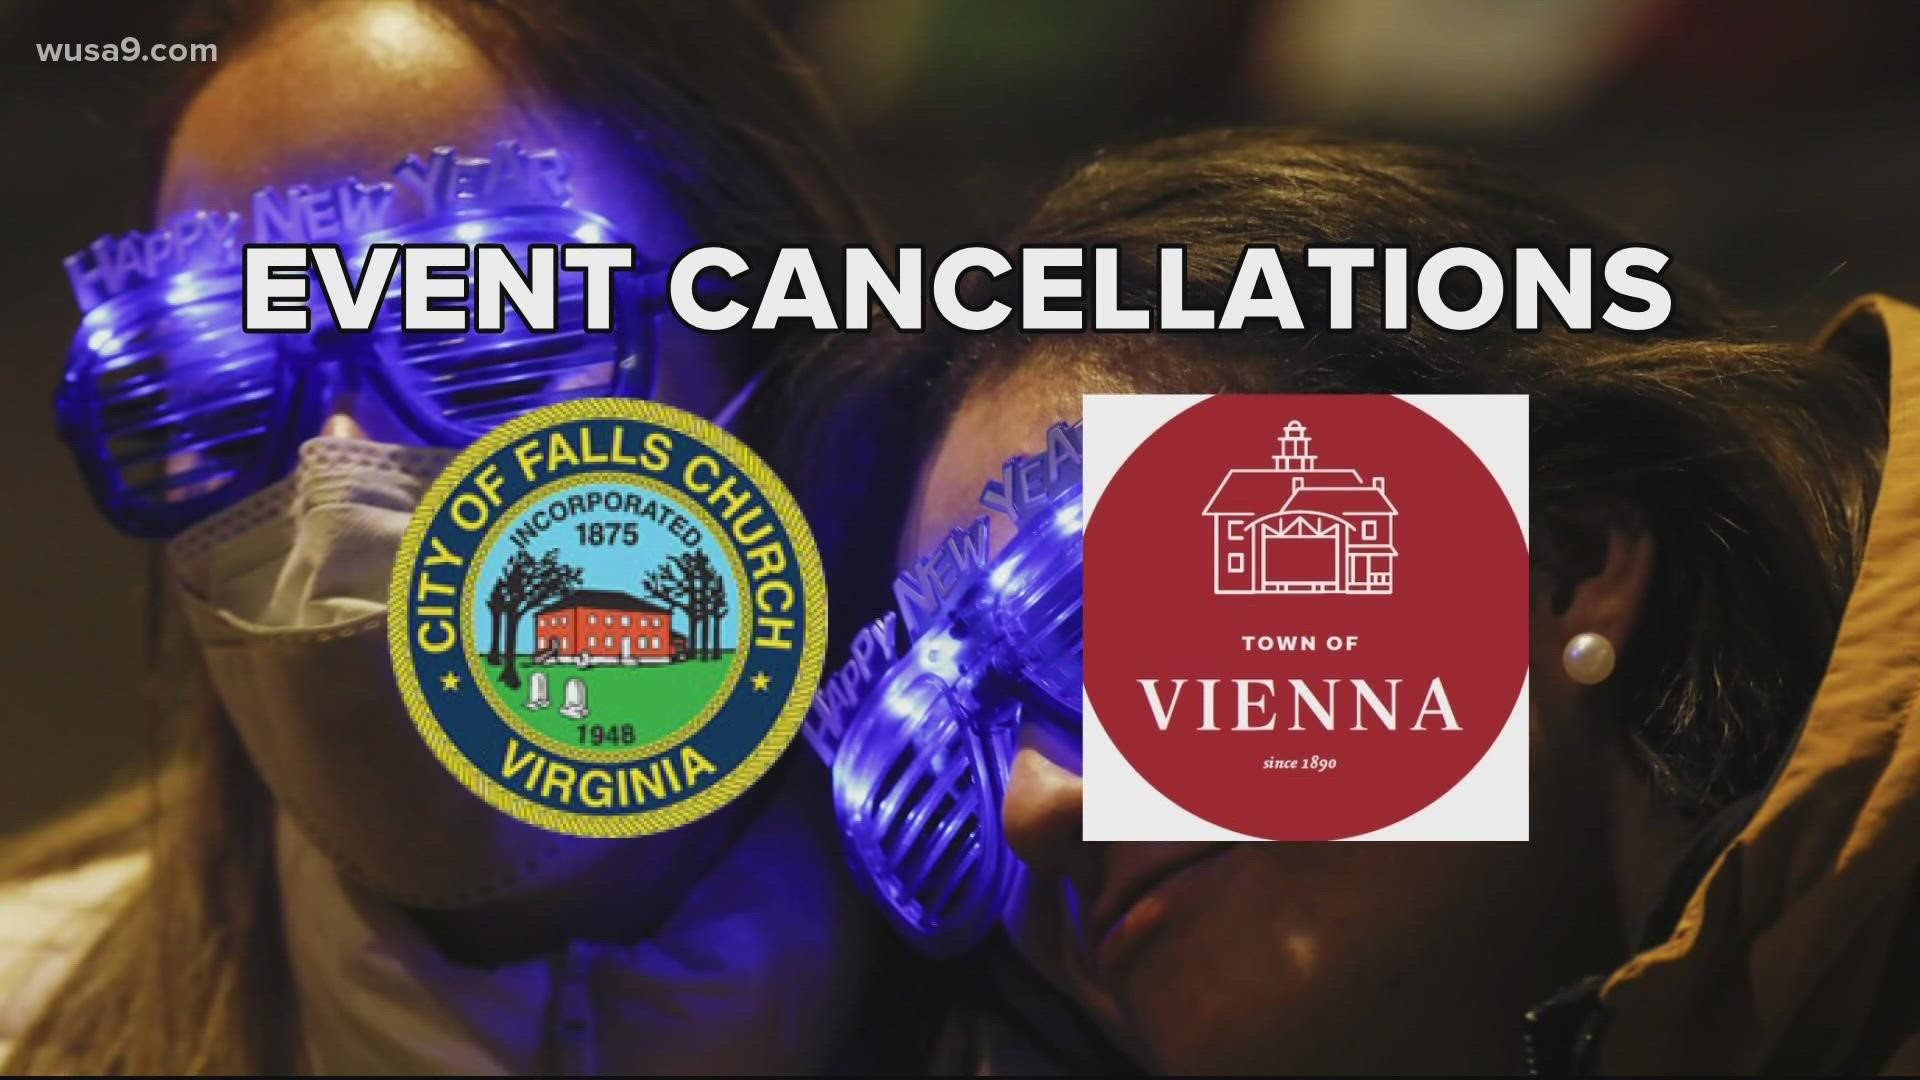 Tuesday brought the cancellation of more New Year's Eve events in the region due to surging COVID cases and concerns about spreading the virus.